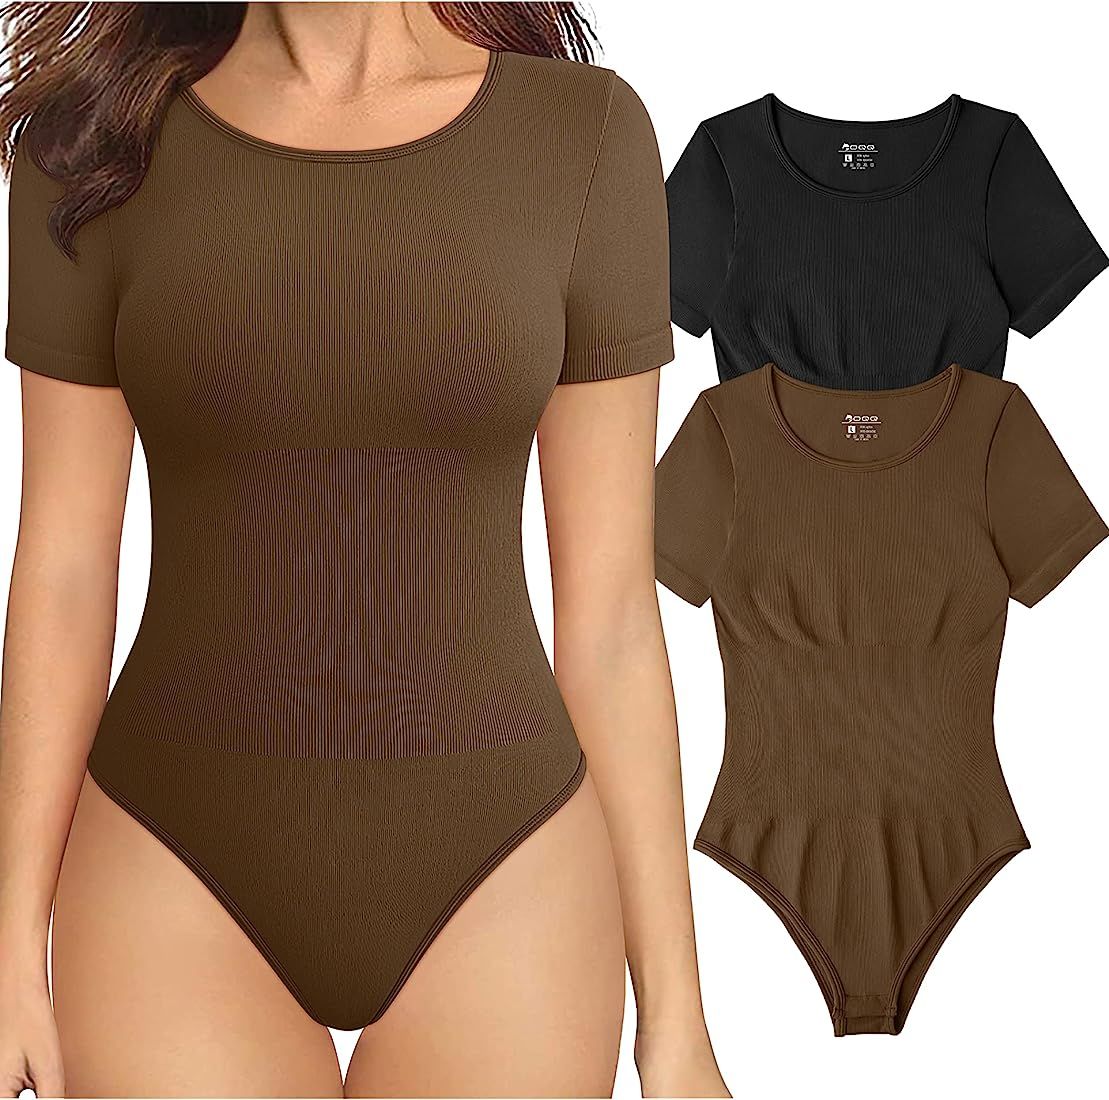 OQQ Women's 2 Piece Bodysuits Sexy Ribbed One Piece Short Sleeve Tops Bodysuits | Amazon (US)